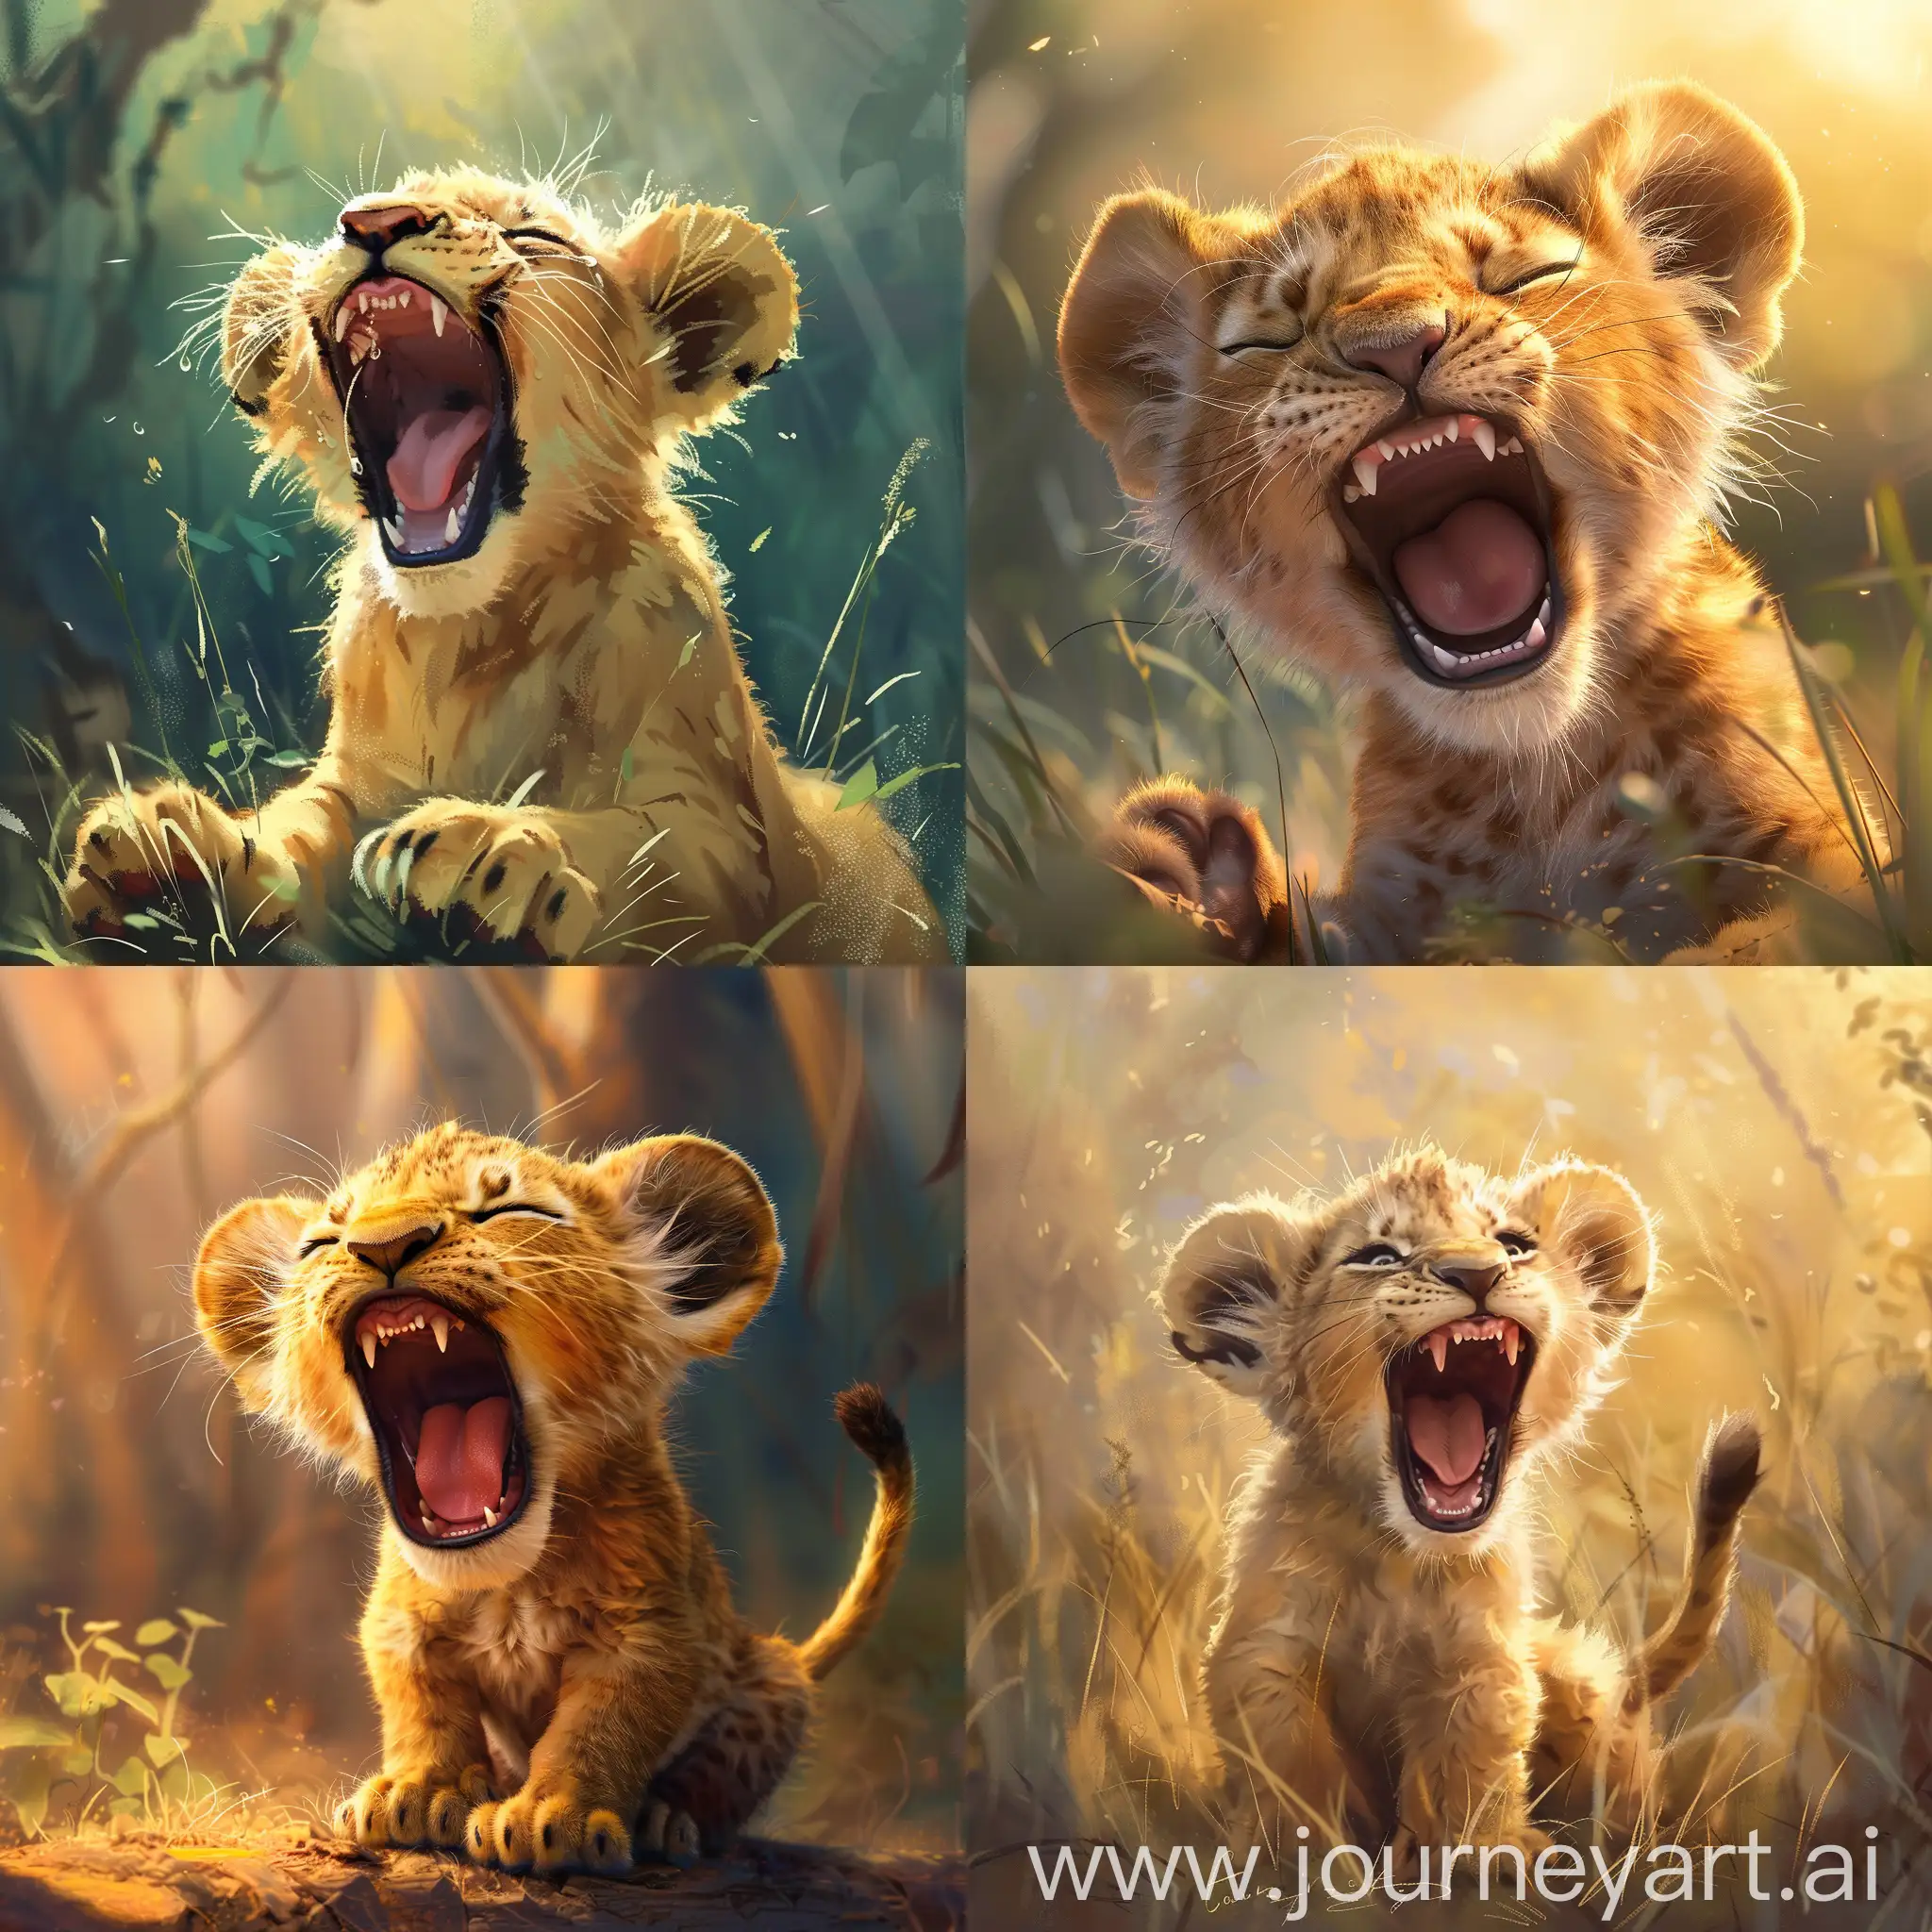 Adorable-Lion-Cub-Stretching-in-Gentle-Morning-Light-2D-Illustration